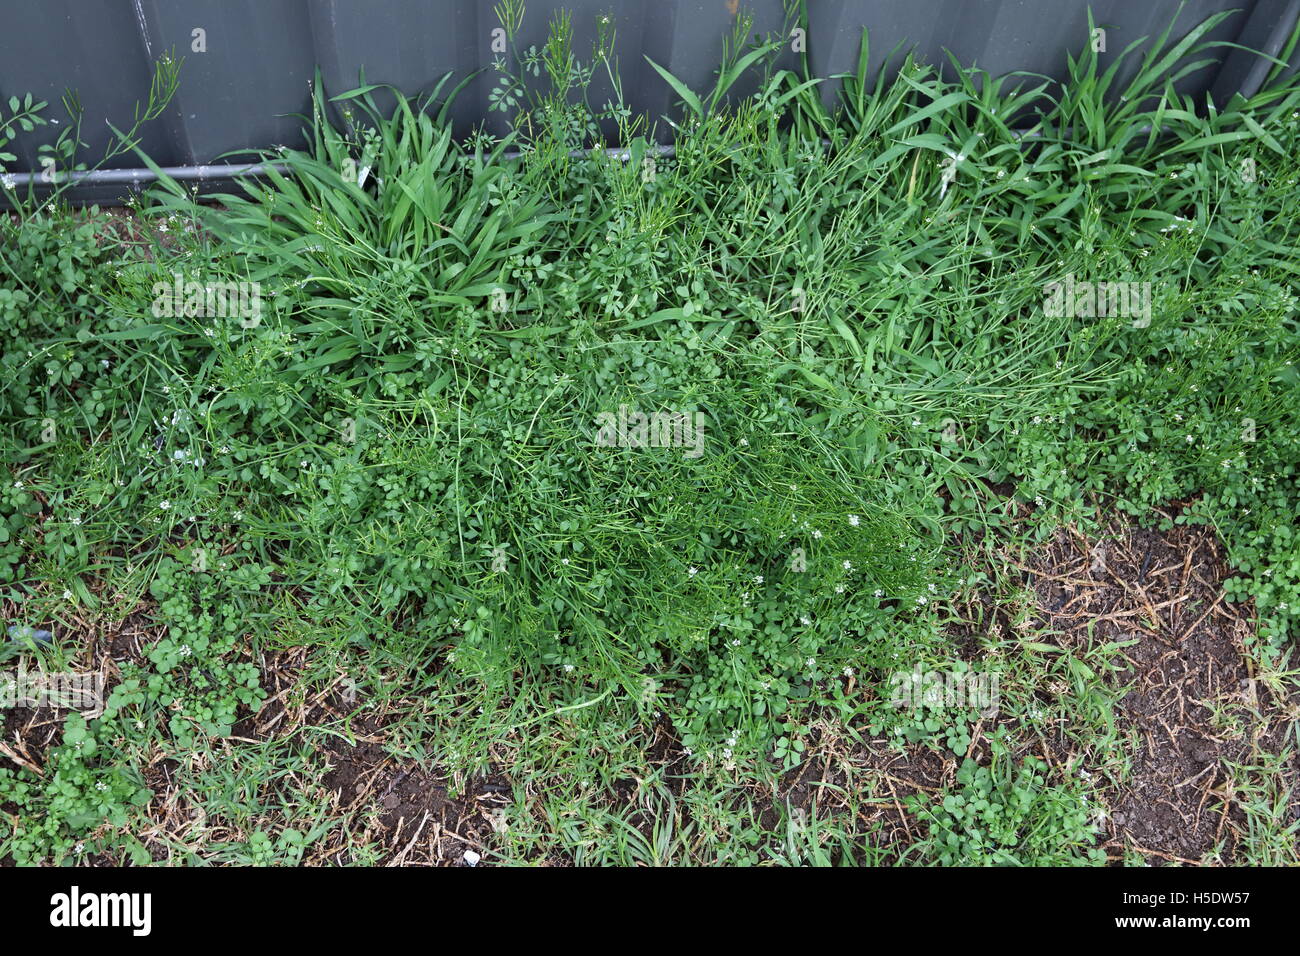 Grass and weeds growing near brick metal fence Stock Photo